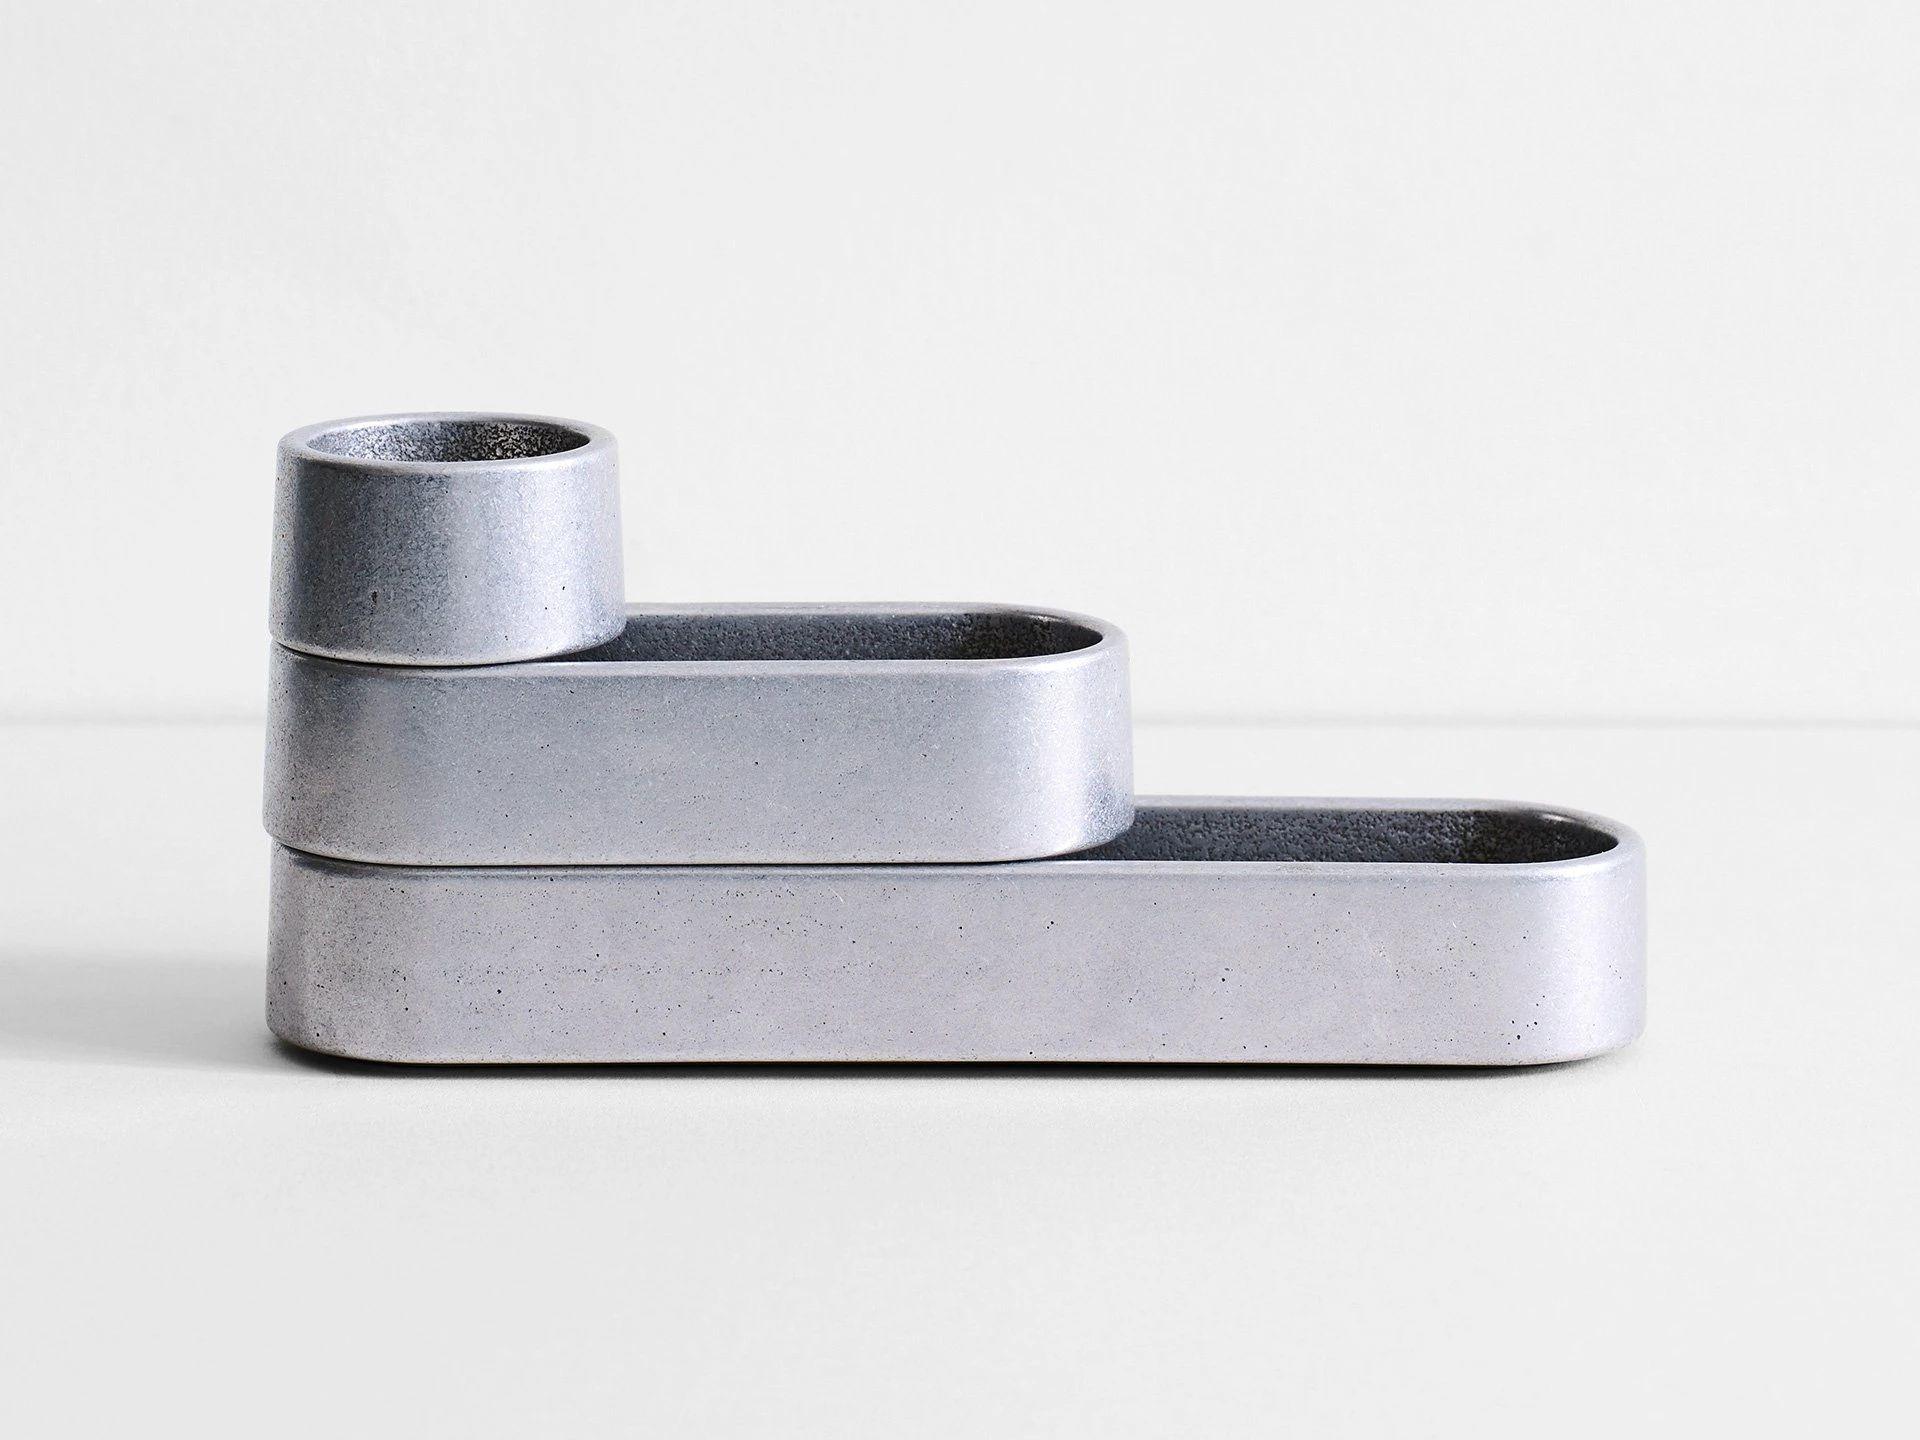 Sculpted aluminum stack trays by Henry Wilson
Dimensions: L 21 x W 5 x H 10
Materials: Aluminum 

The stack trays are sold in a set of three that can be used together or individually. Group them on your desk, dining table, or next to the bed.